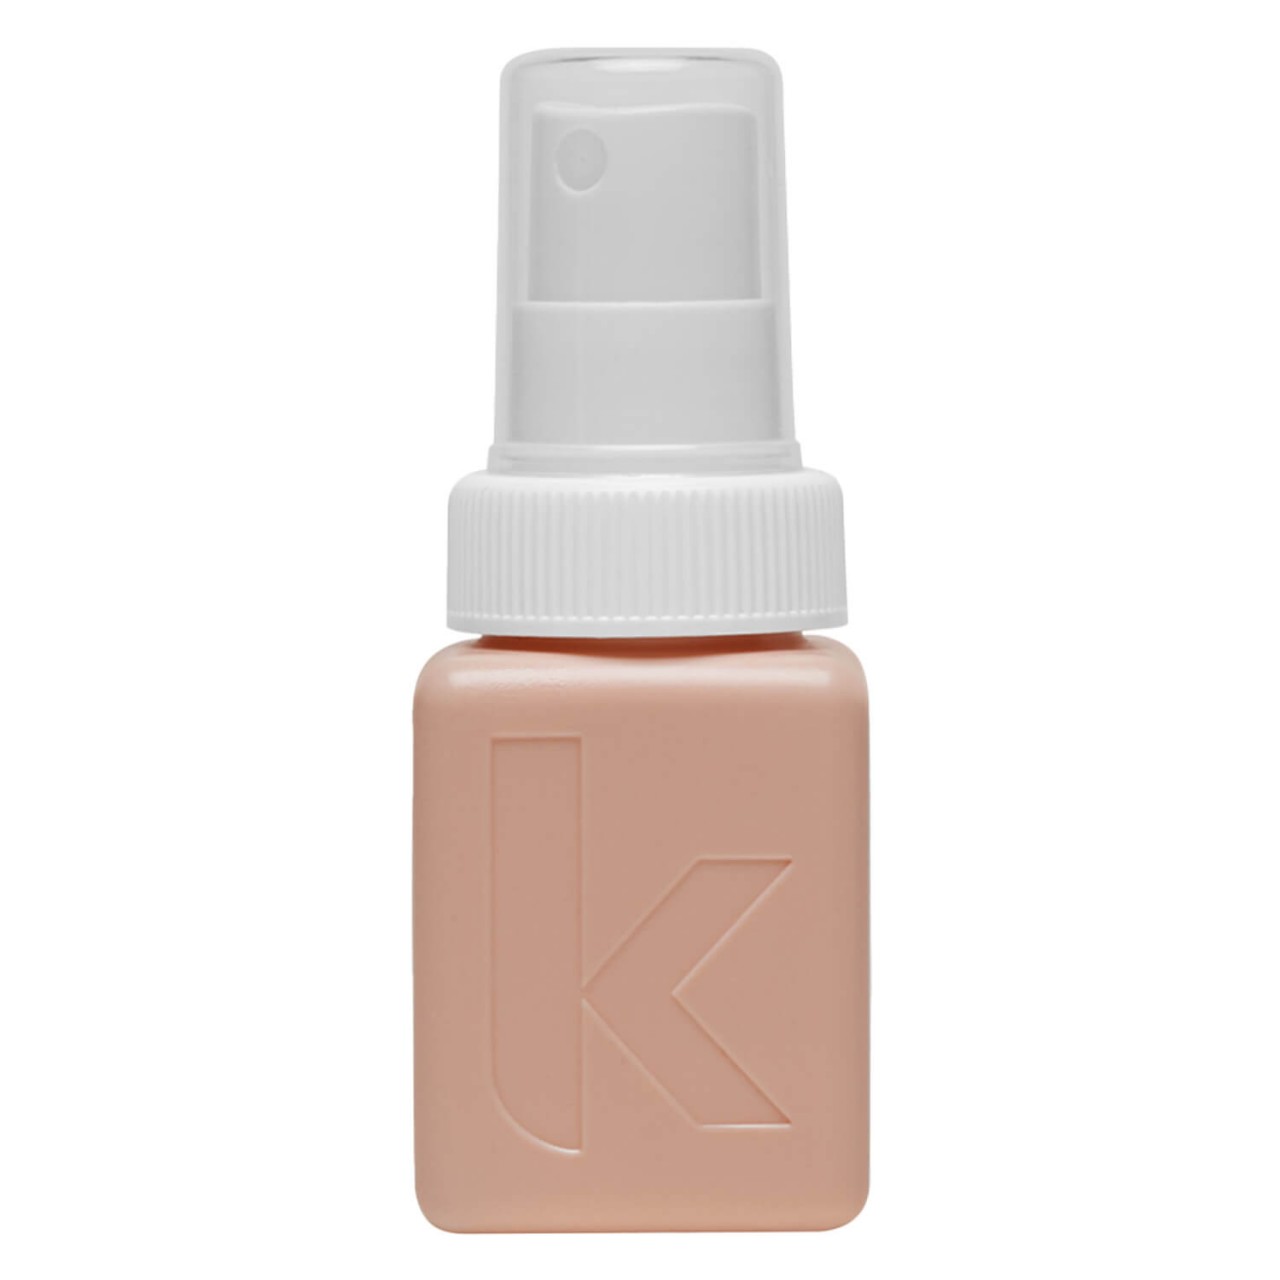 Staying.Alive - Leave-in Conditioner von Kevin Murphy